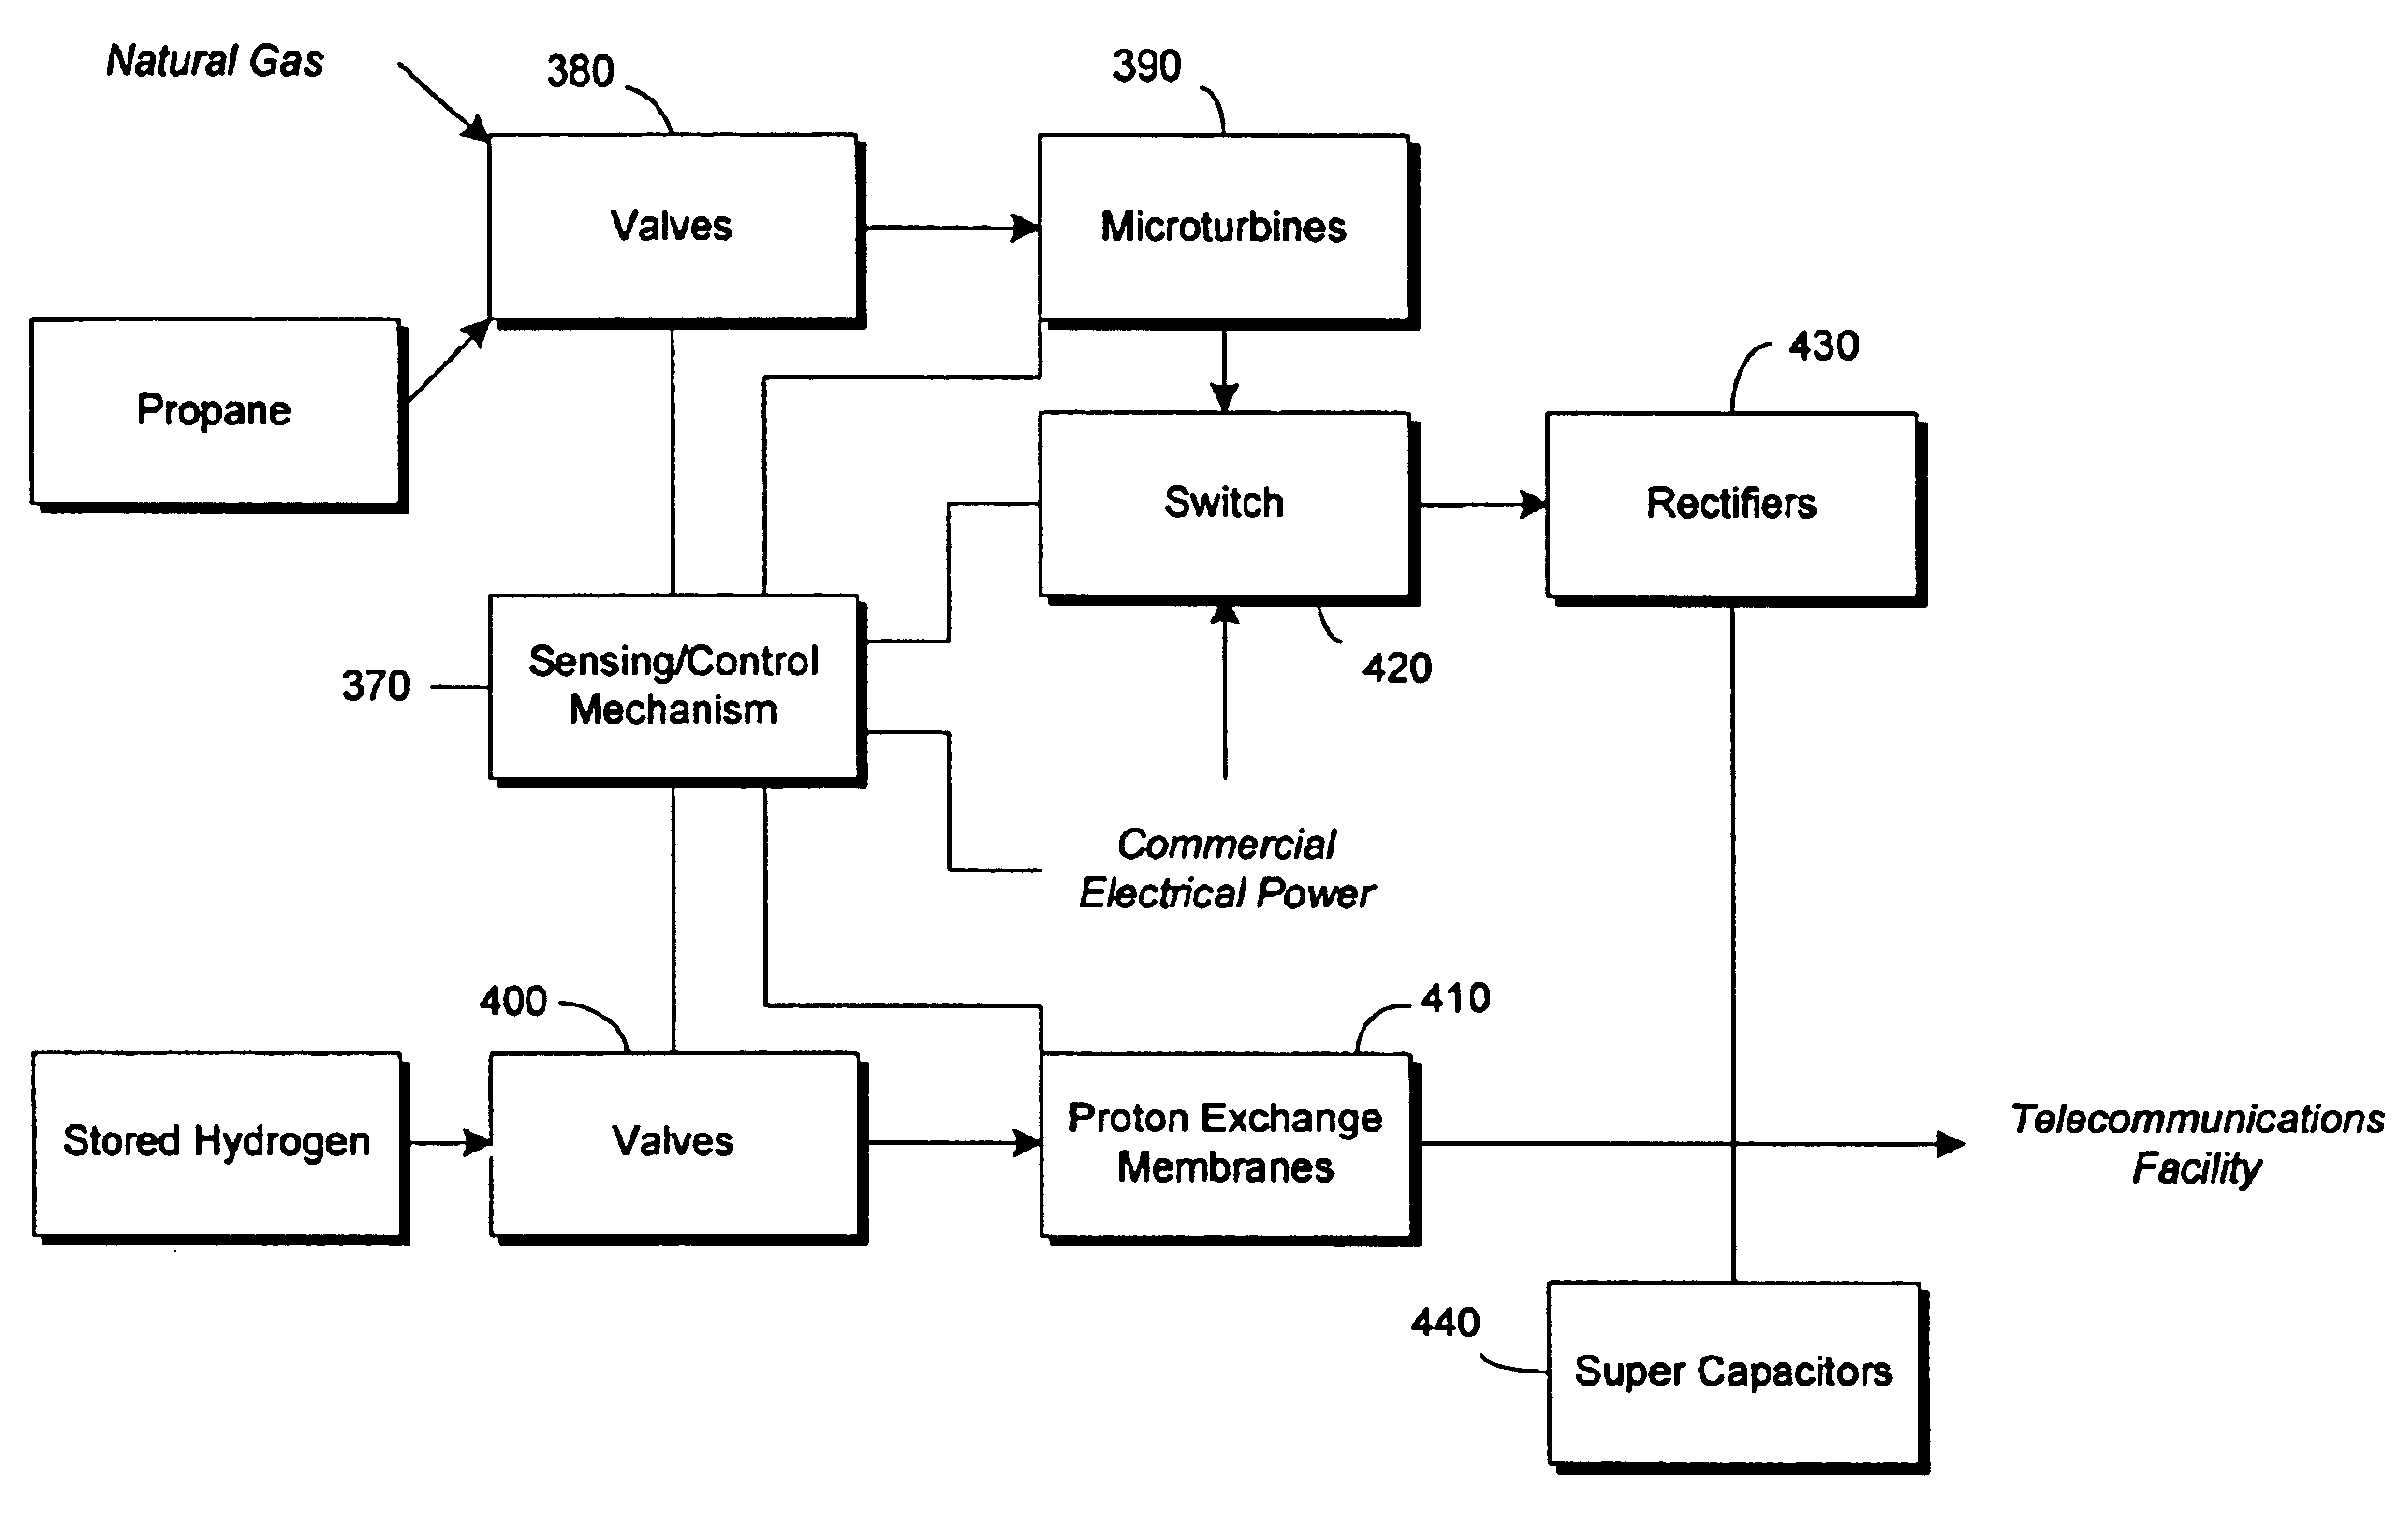 Proton exchange membrane based power system for a telecommunication facility